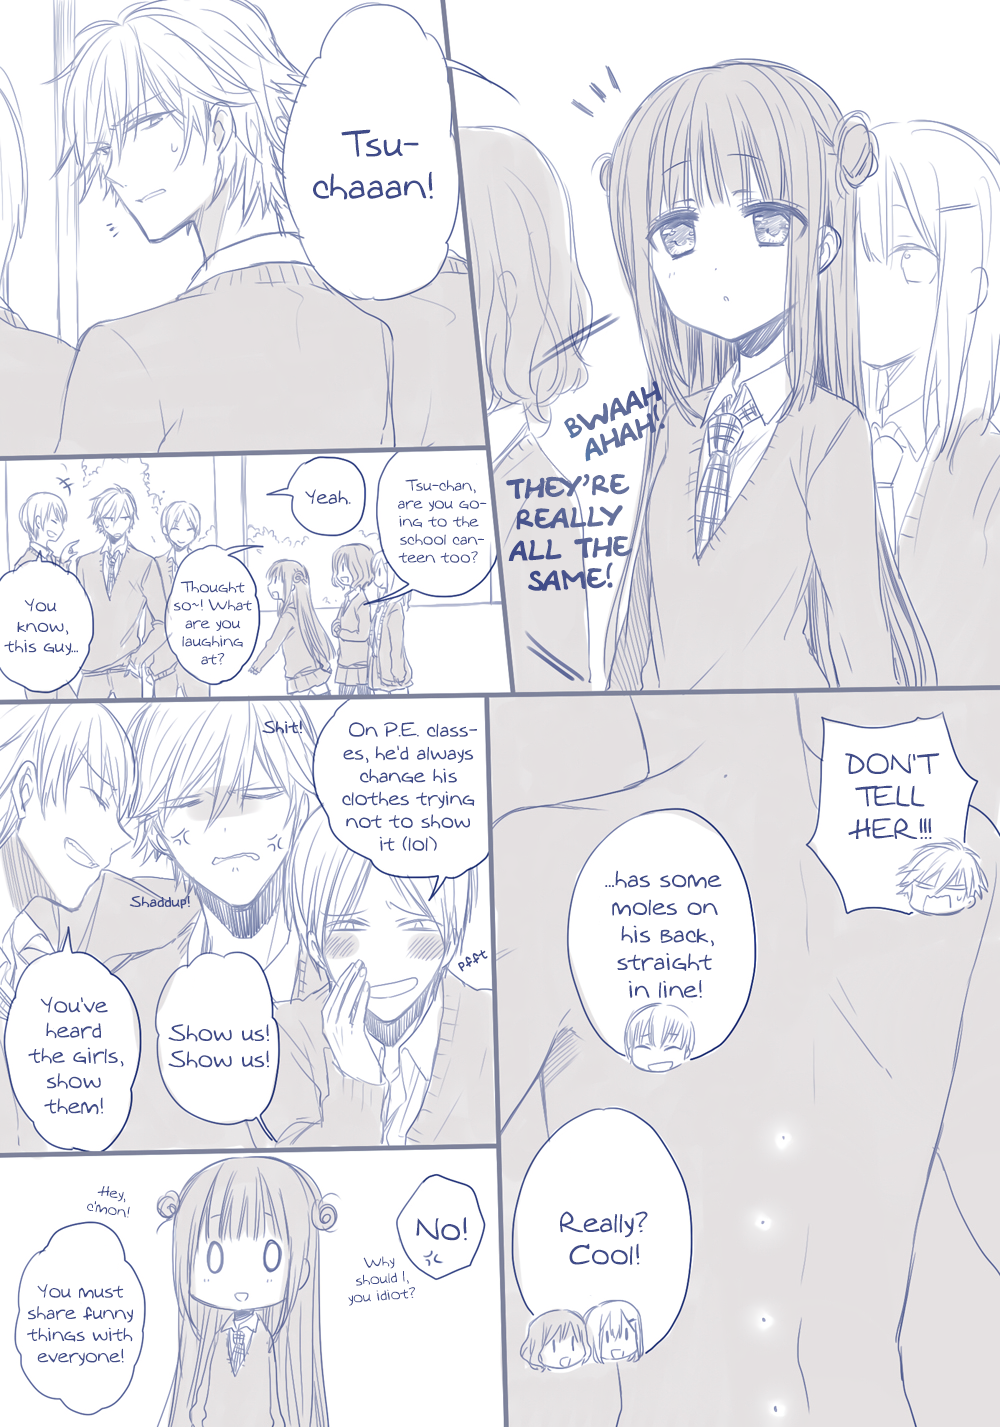 She's Not My Girlfriend! We're Just Childhood Friends - Page 1